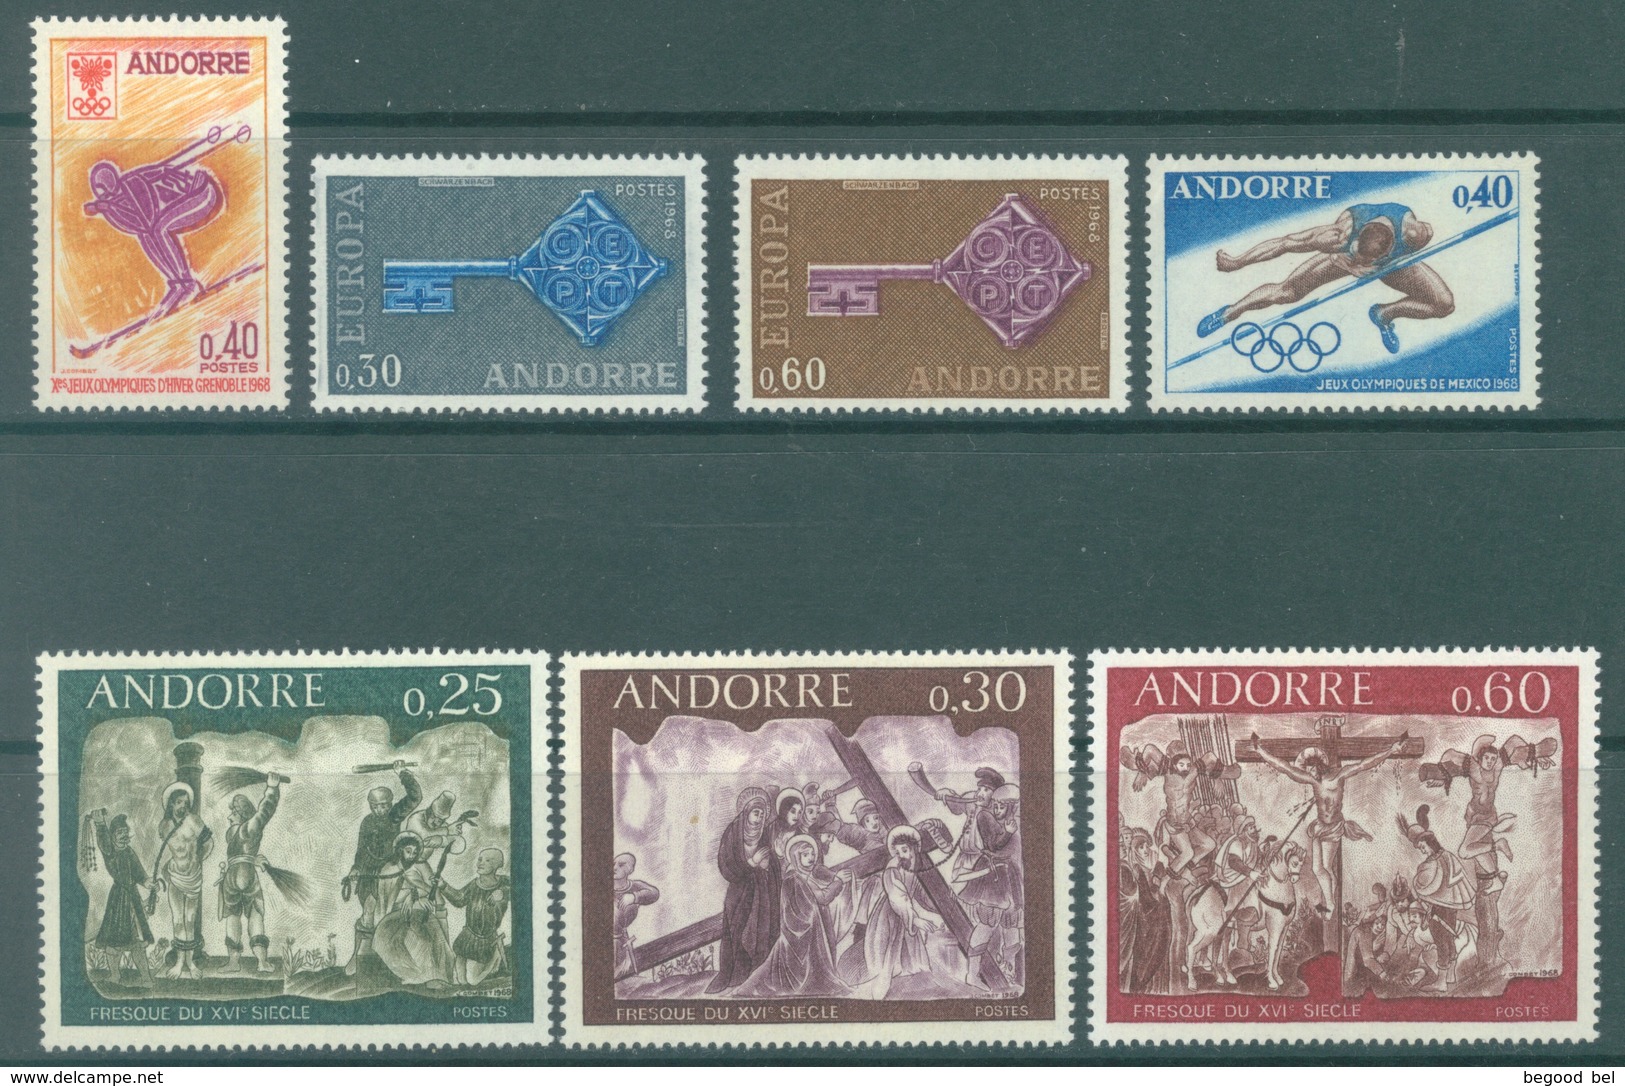 ANDORRE - MNH/** - 1968 - YEAR COMPLETE - Yv 187-193 -  Lot 19107 - Années Complètes